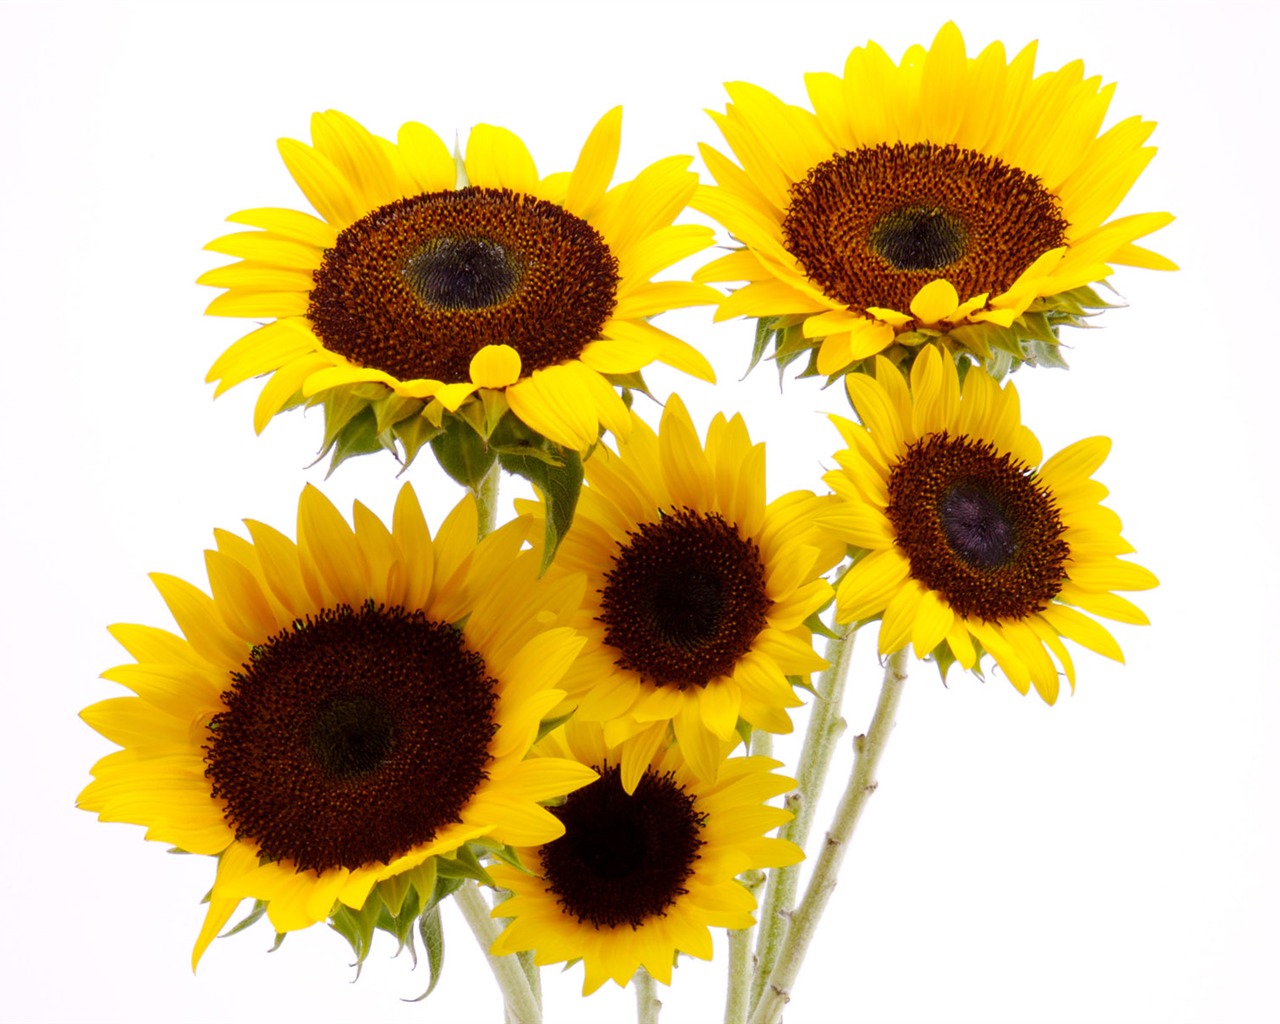 Sunny sunflower photo HD Wallpapers #3 - 1280x1024